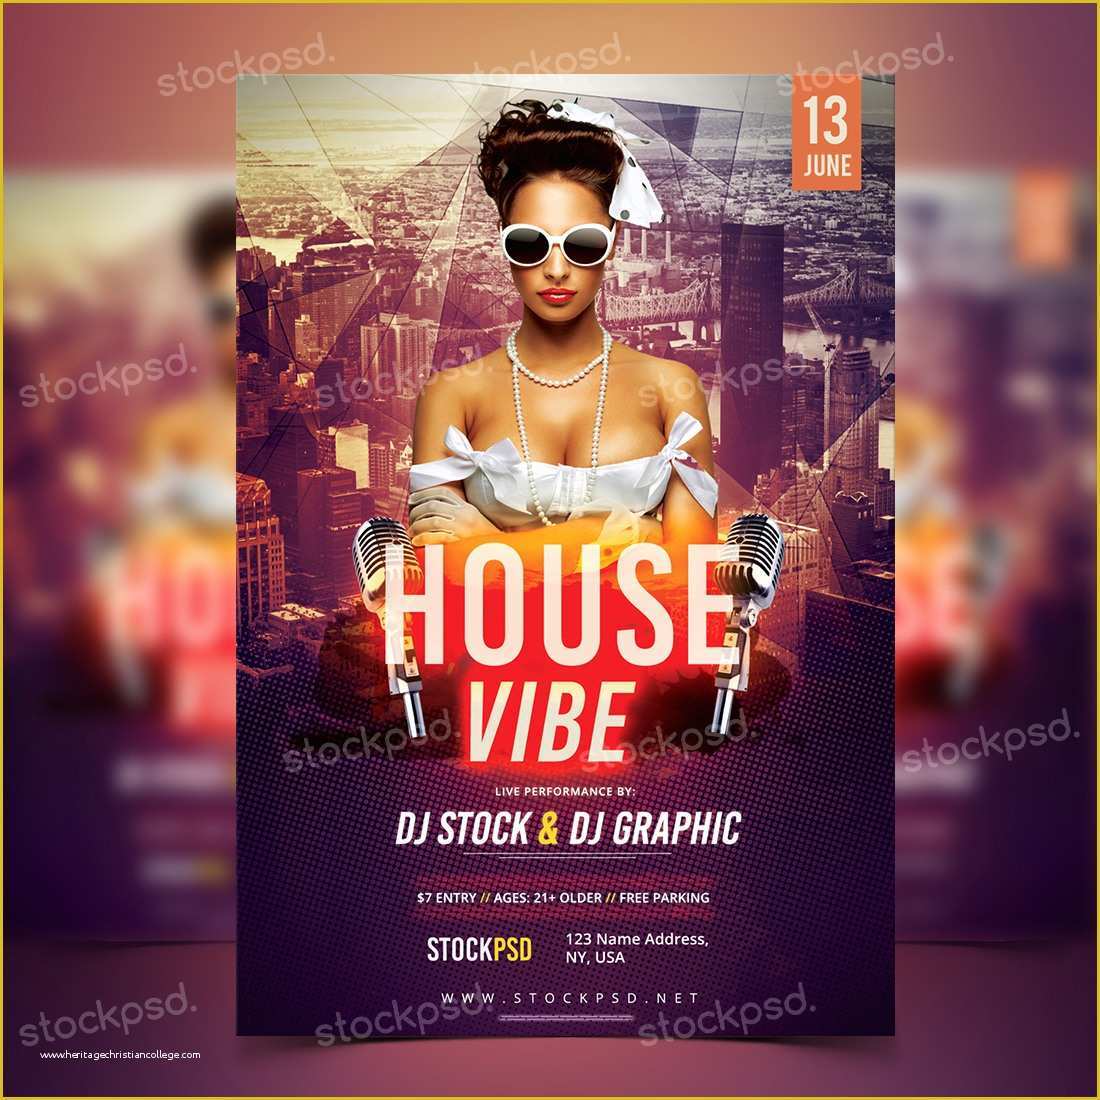 Free Psd Flyer Templates Of House Vibe Free Psd Flyer Template Free Psd Flyer